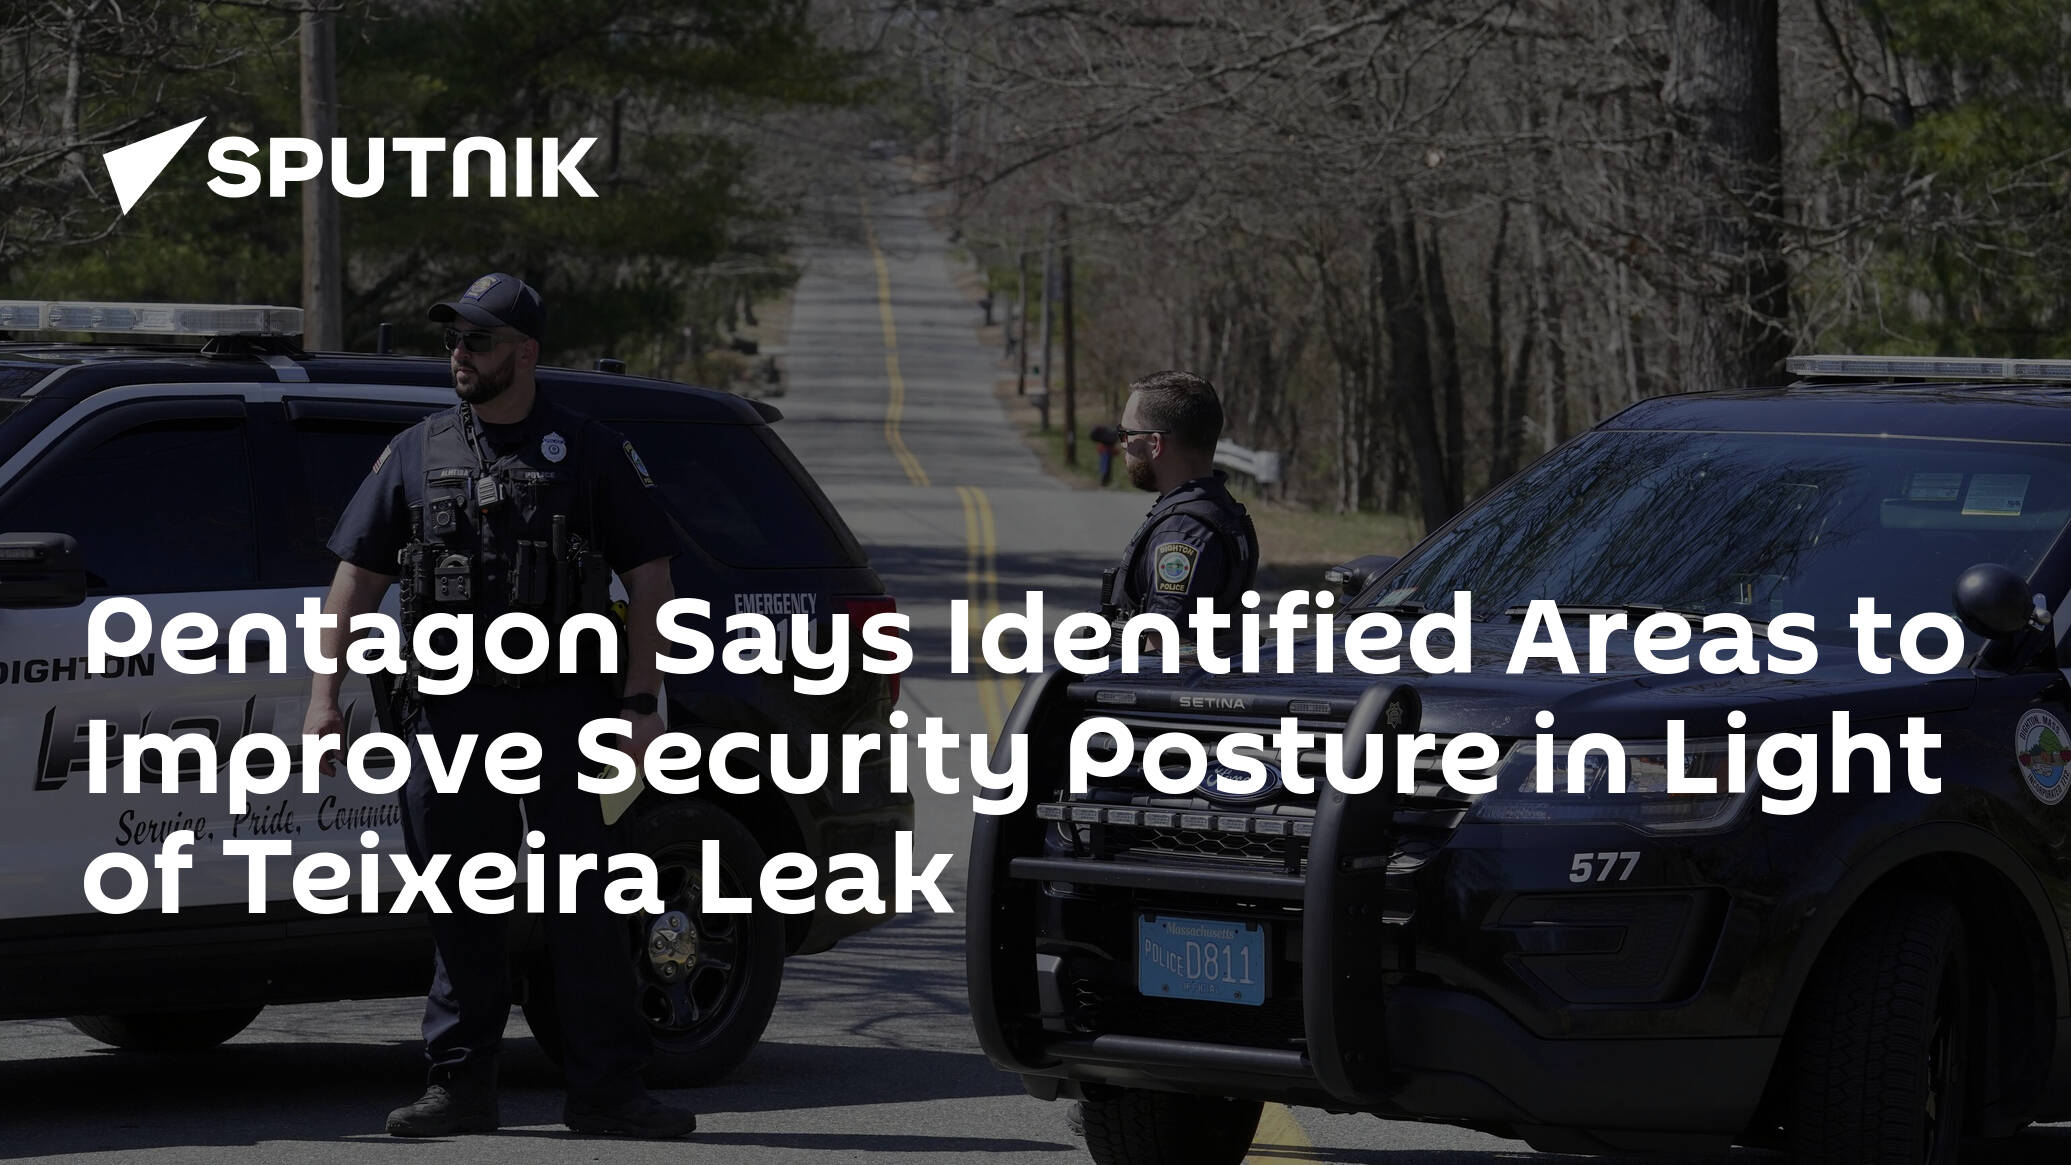 Pentagon Says Identified Areas to Improve Security Posture in Light of Teixeira Leak